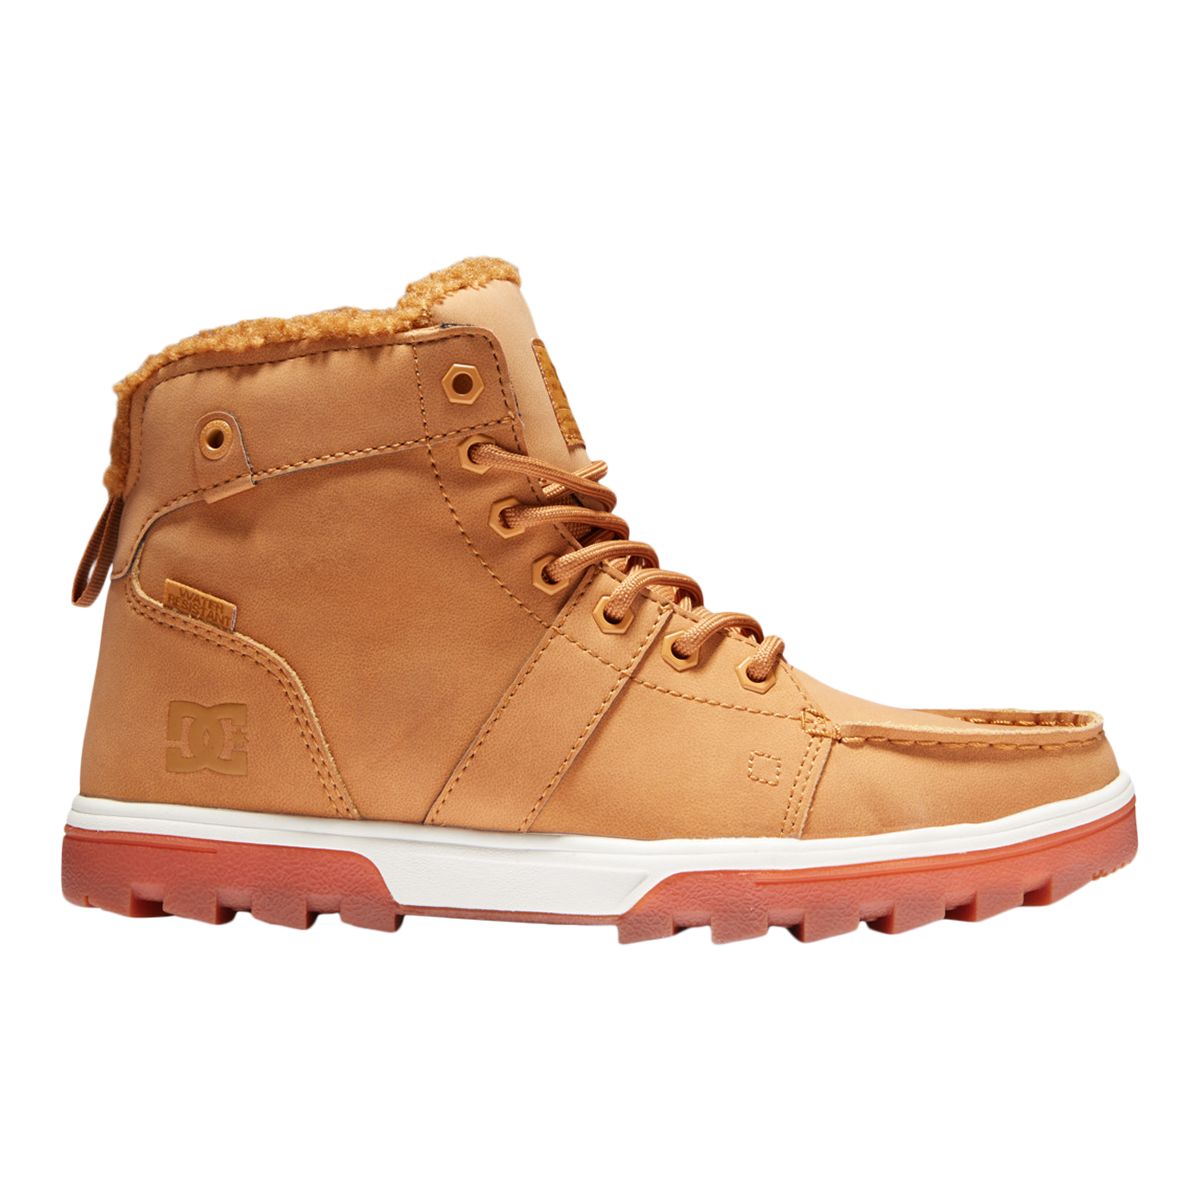 DC Men's Woodland Leather Boots